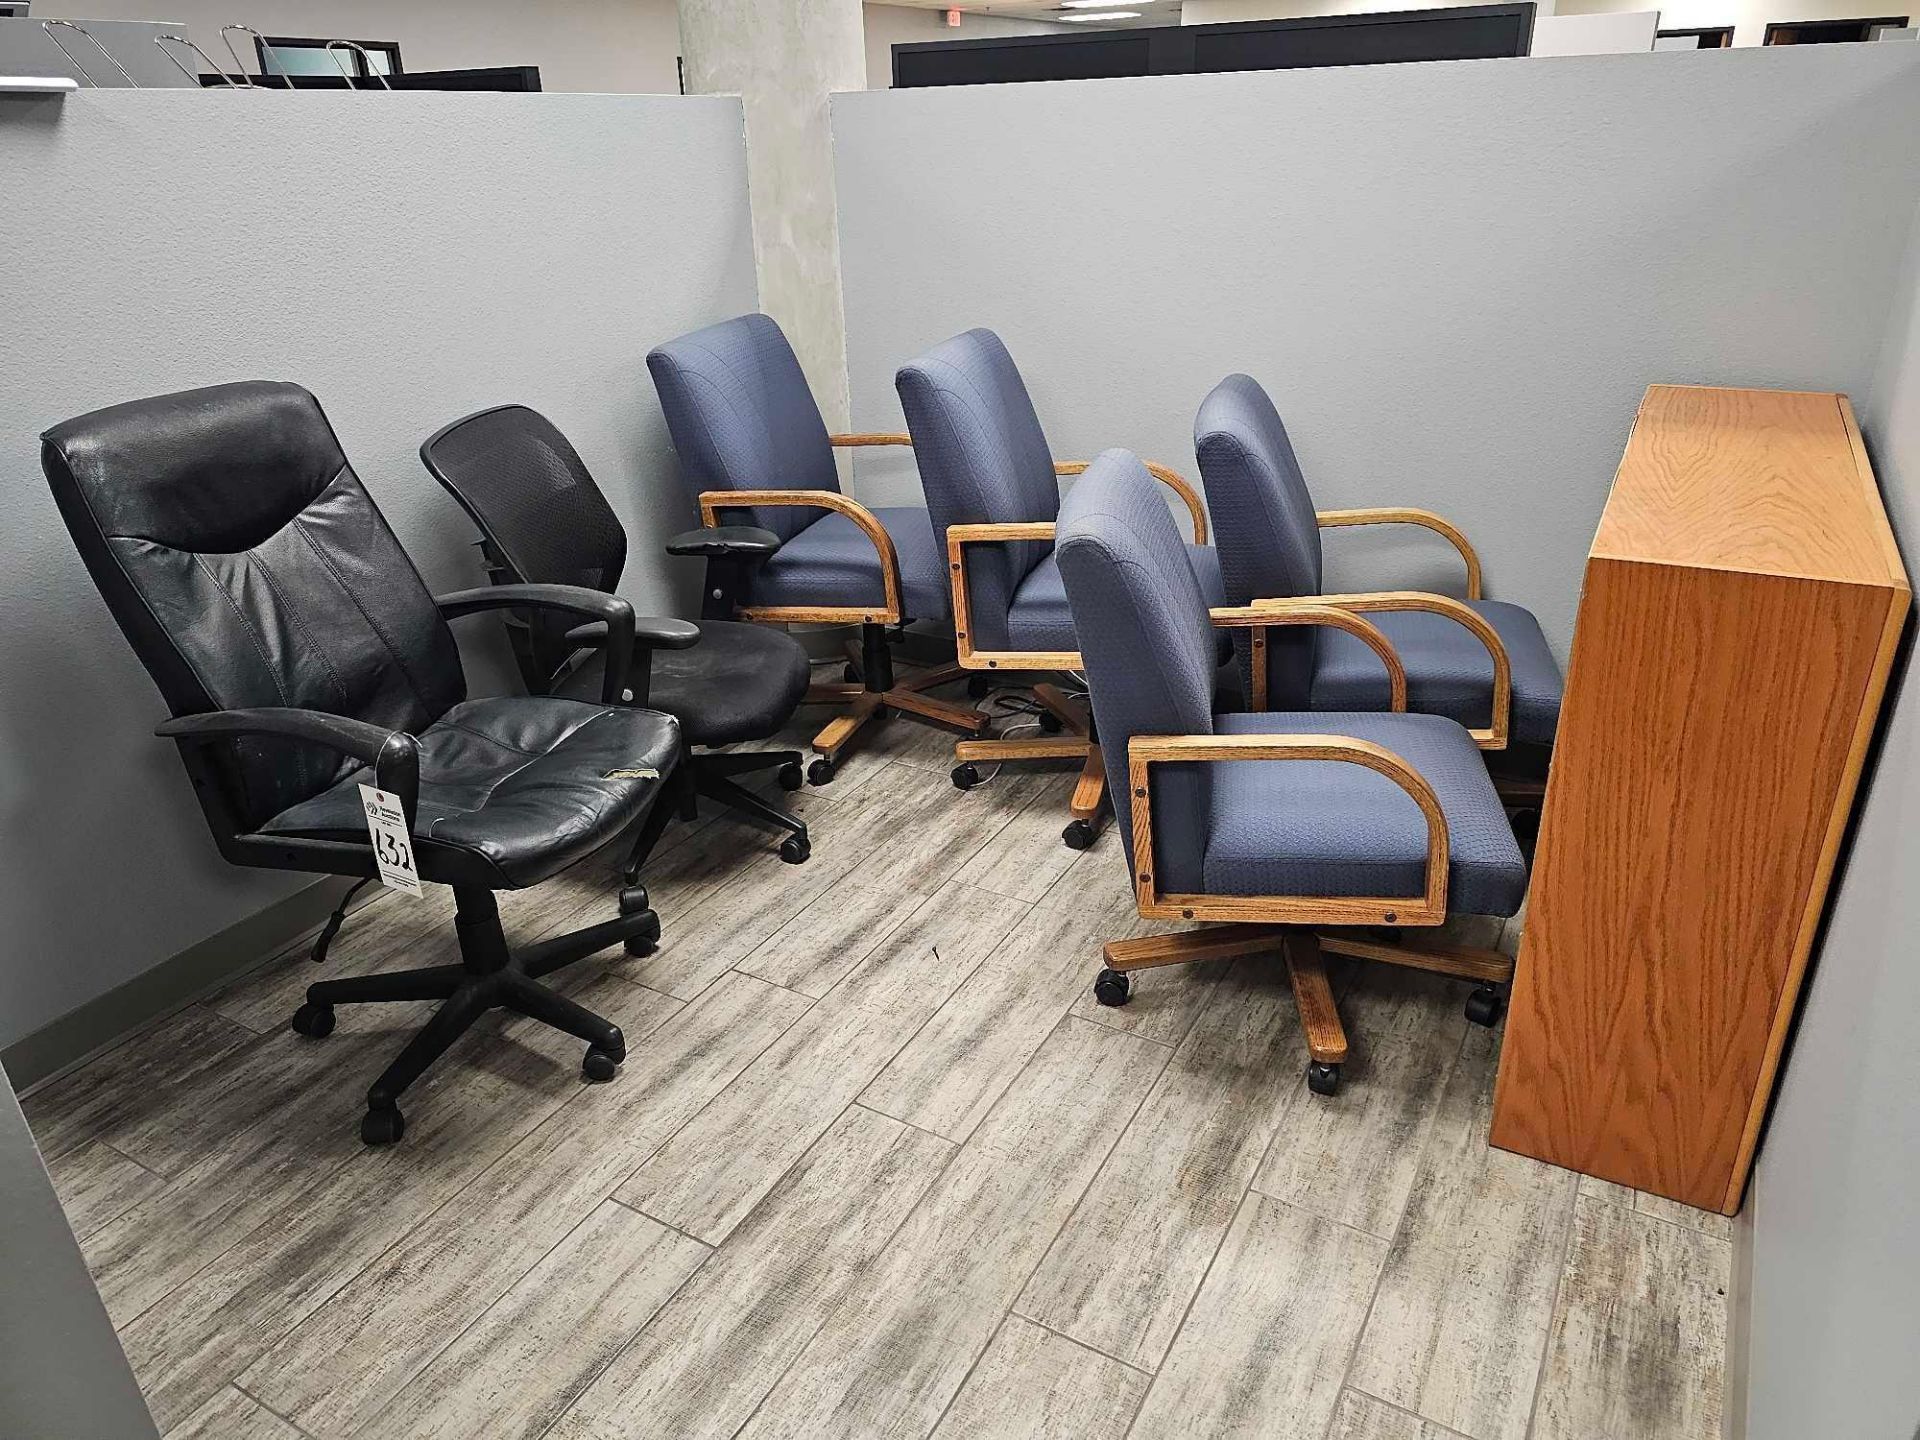 (6) OFFICE CHAIRS, WOODEN SHELF